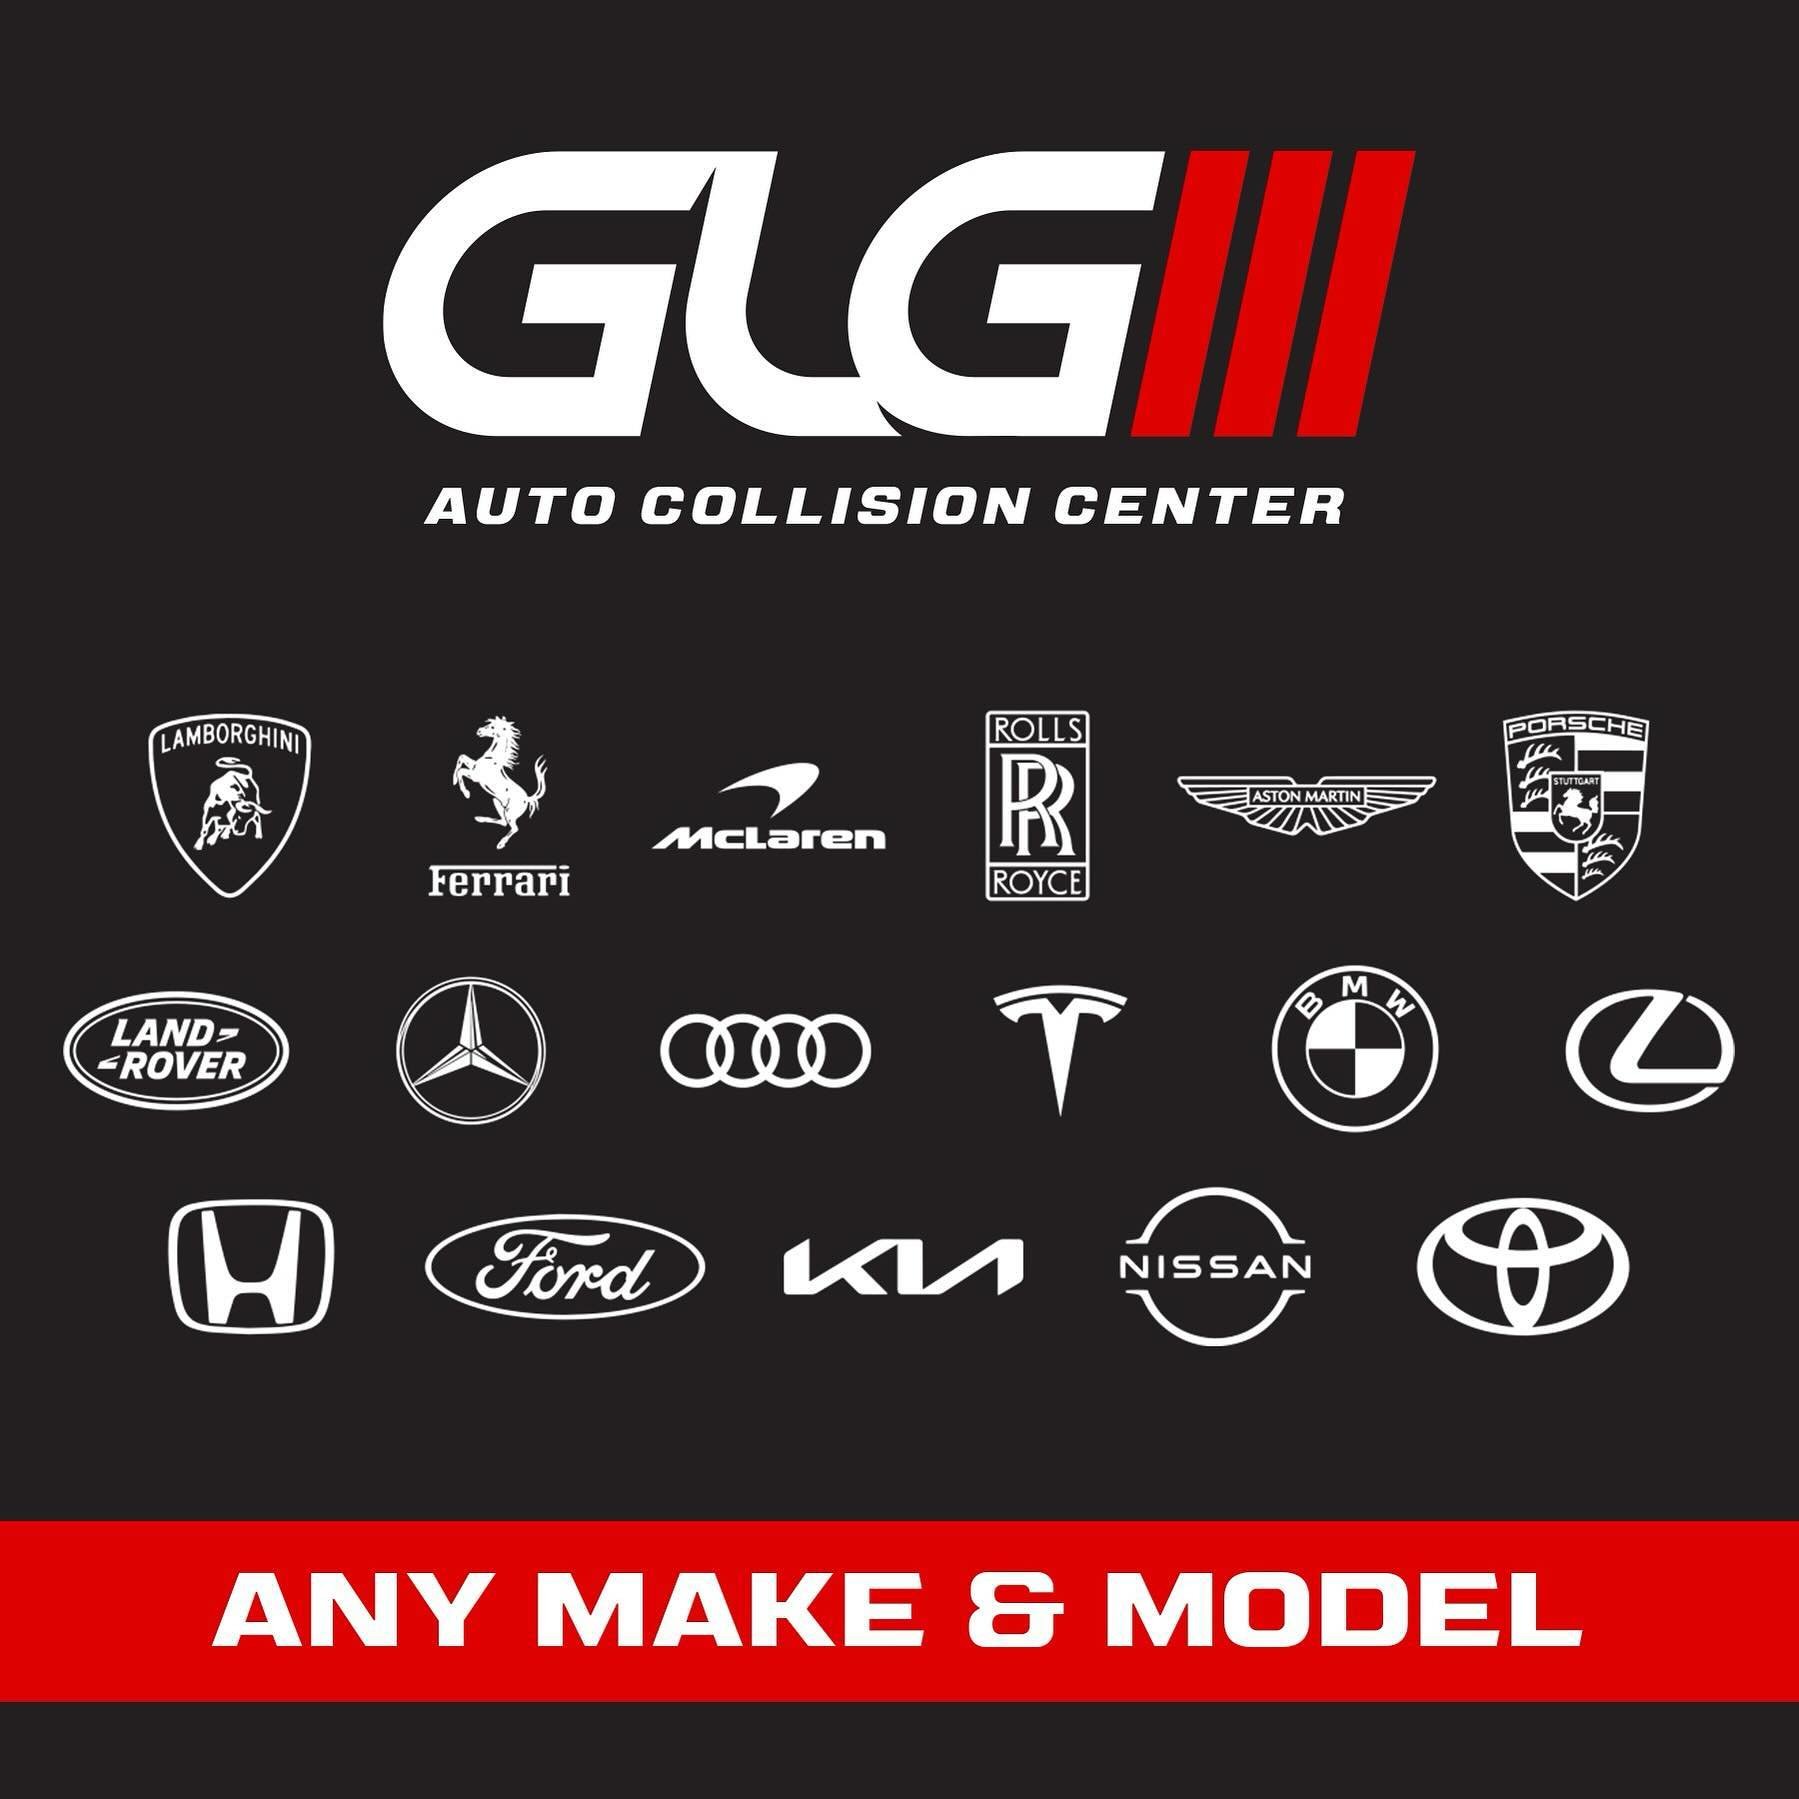 We specialize in all makes &amp; models!